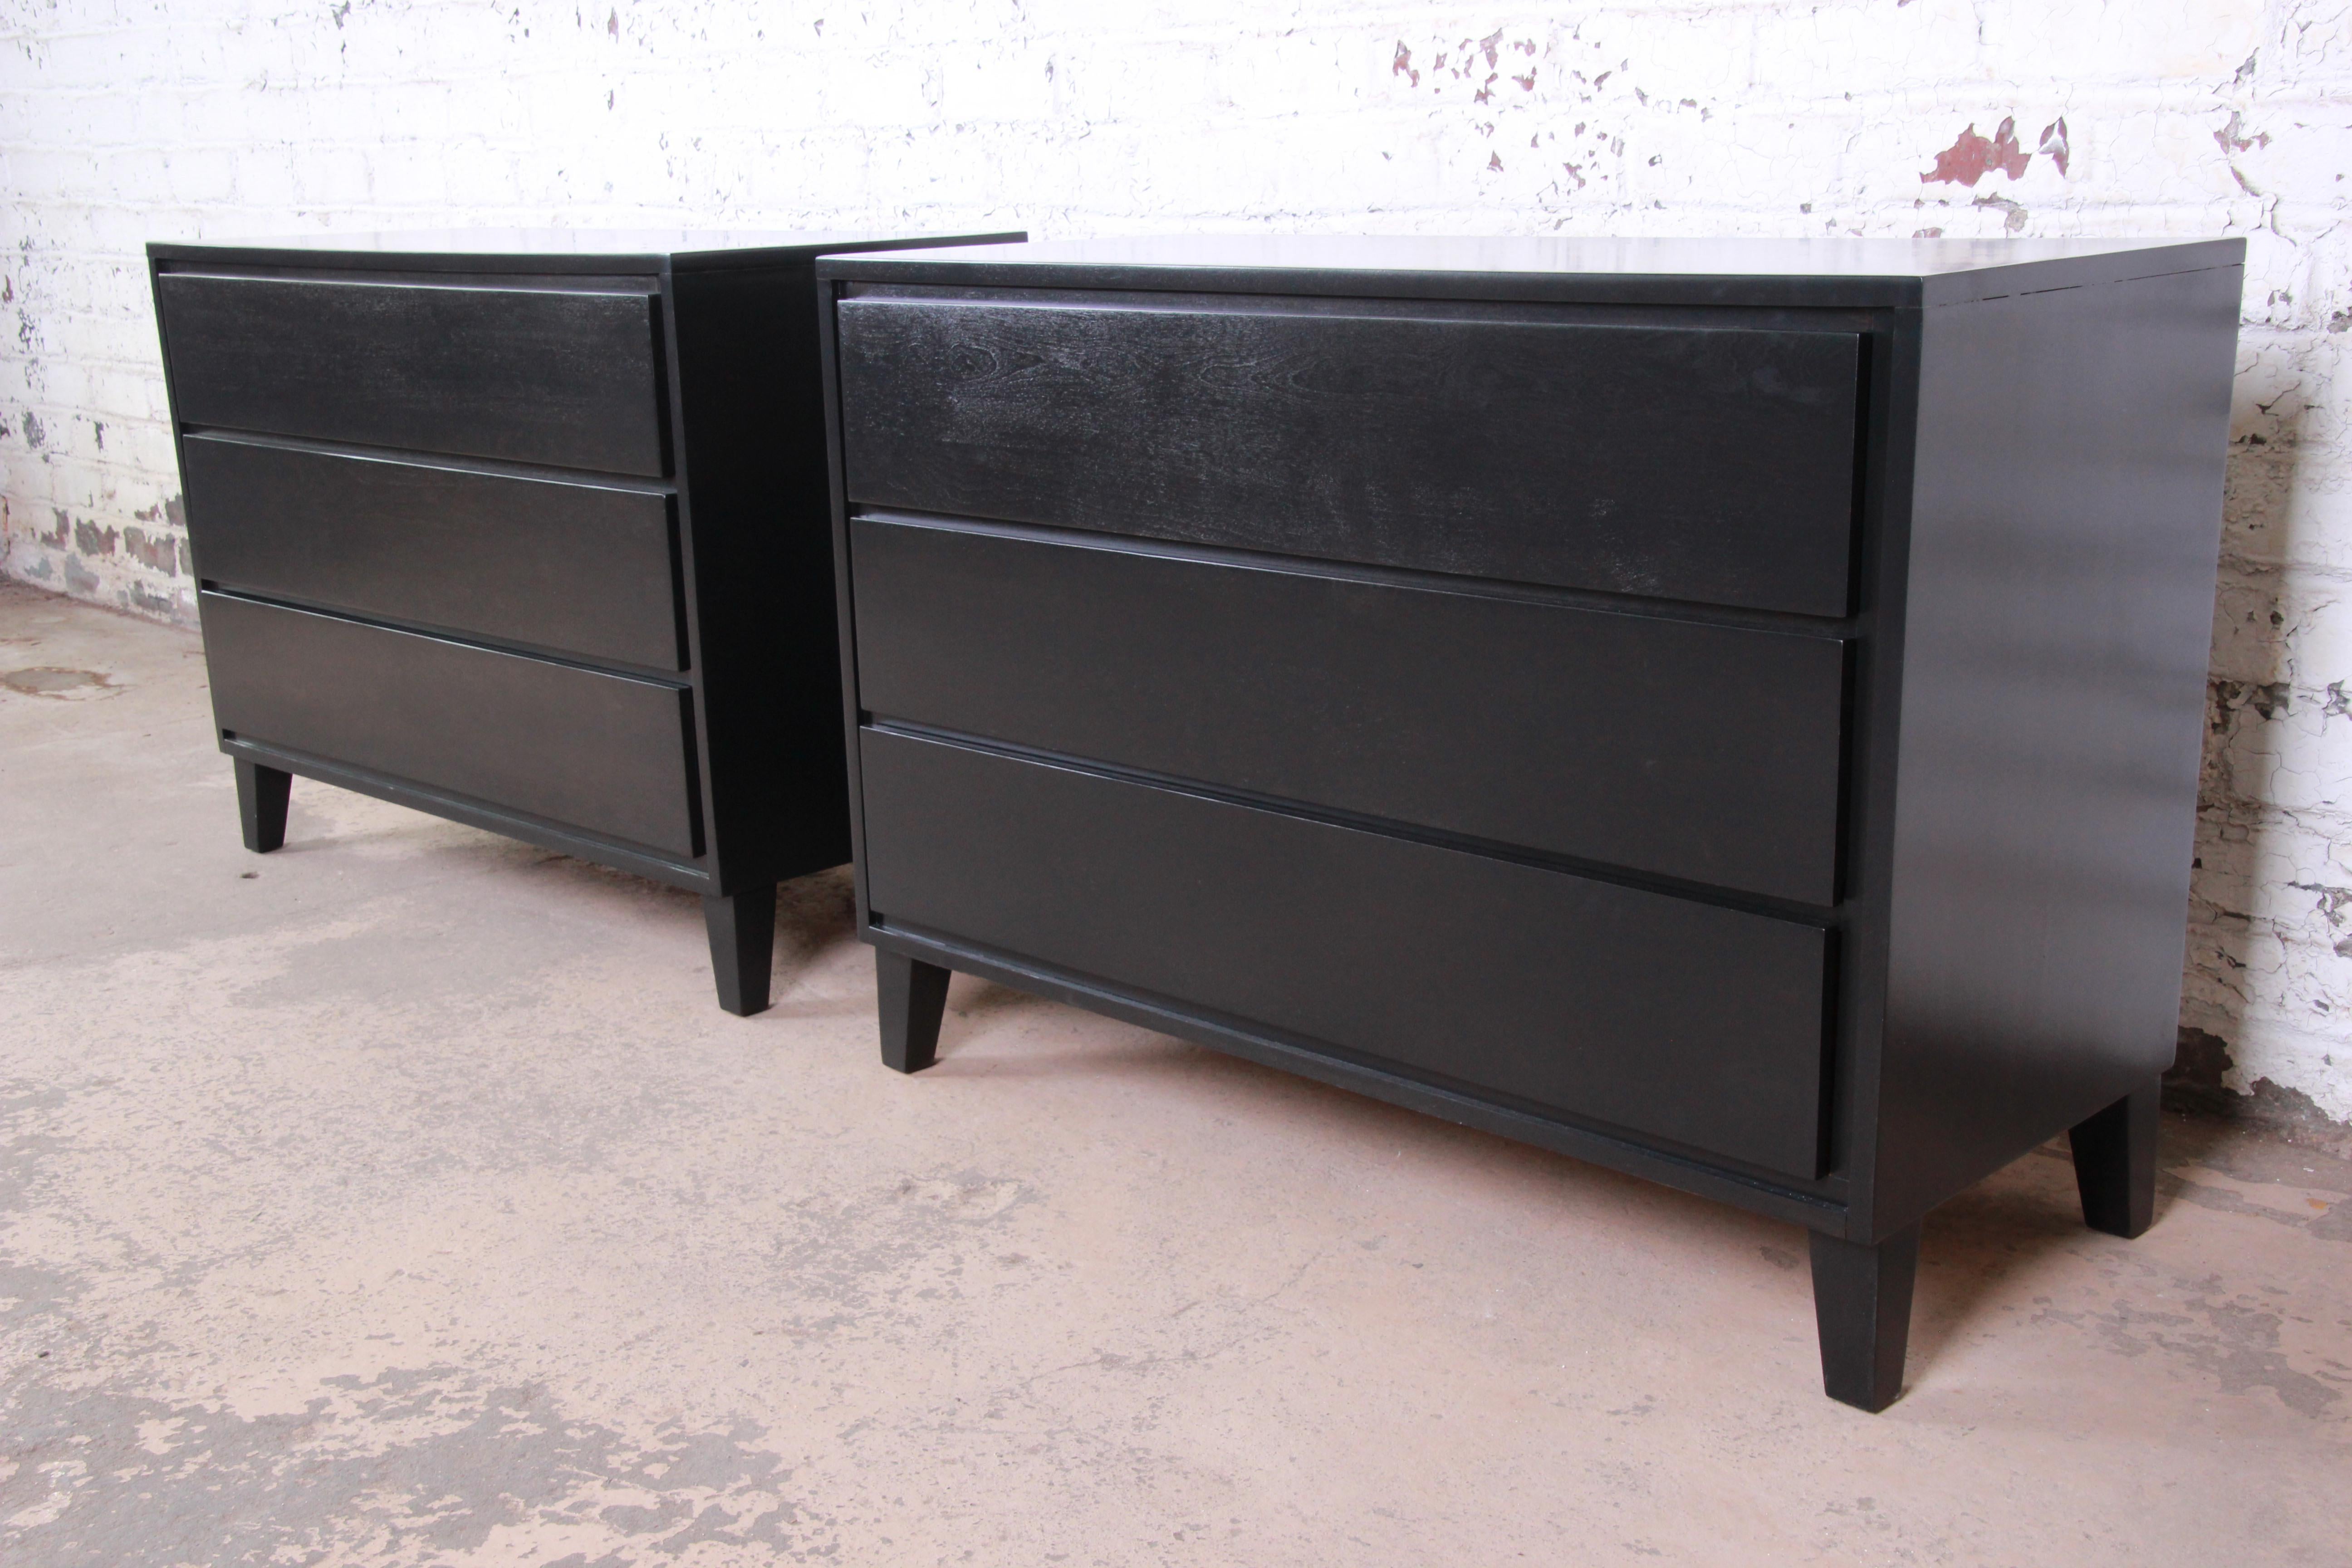 An exceptional pair of ebonized three-drawer dressers or bedside chests designed by Russel Wright for his American Modern line for Conant Ball. The chests features solid birch wood construction, with sleek, Minimalist Mid-Century Modern design. They